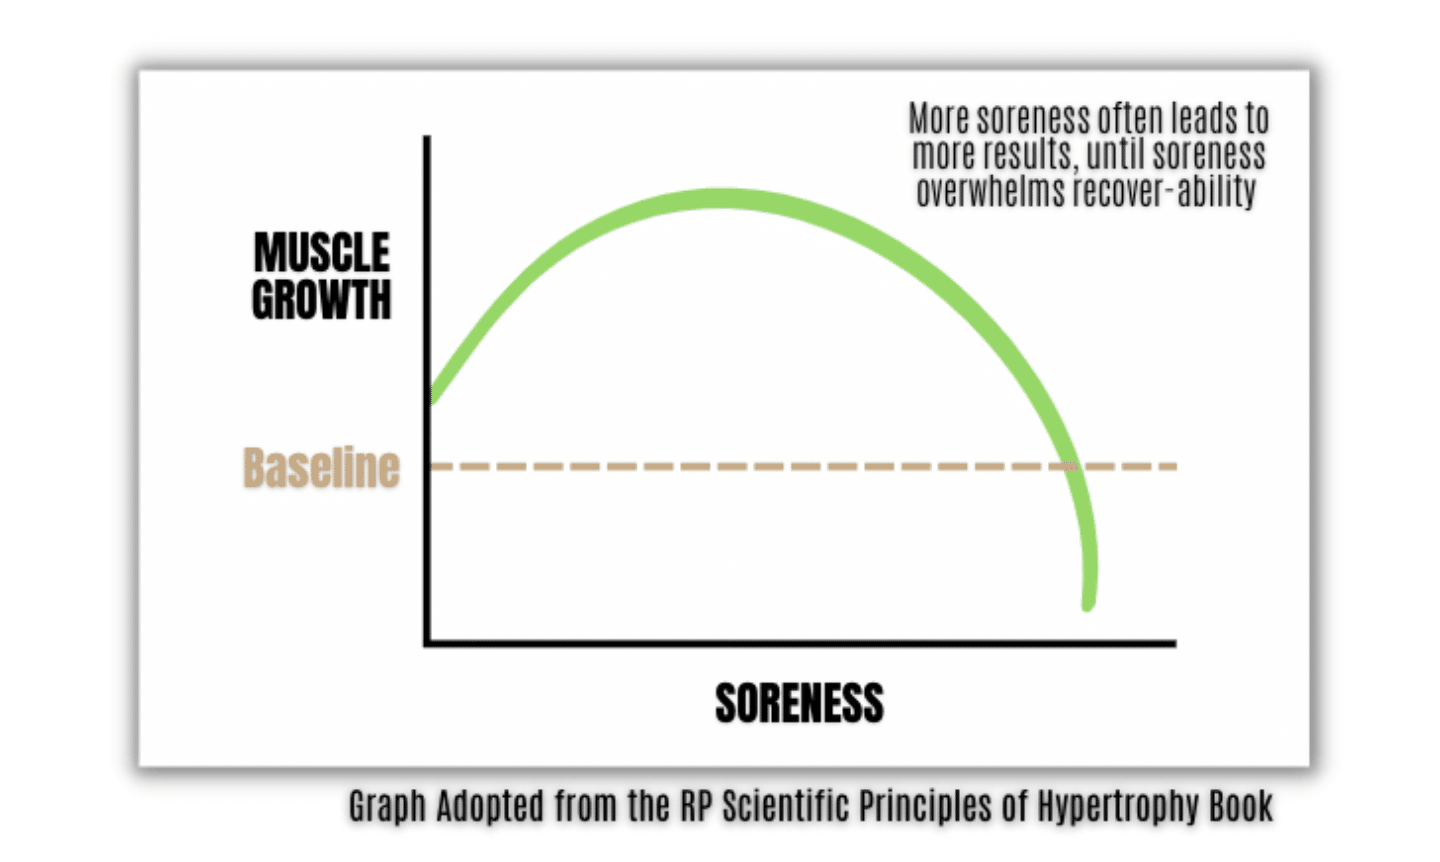 a graph showing the non-linear pathway of muscle soreness overtime